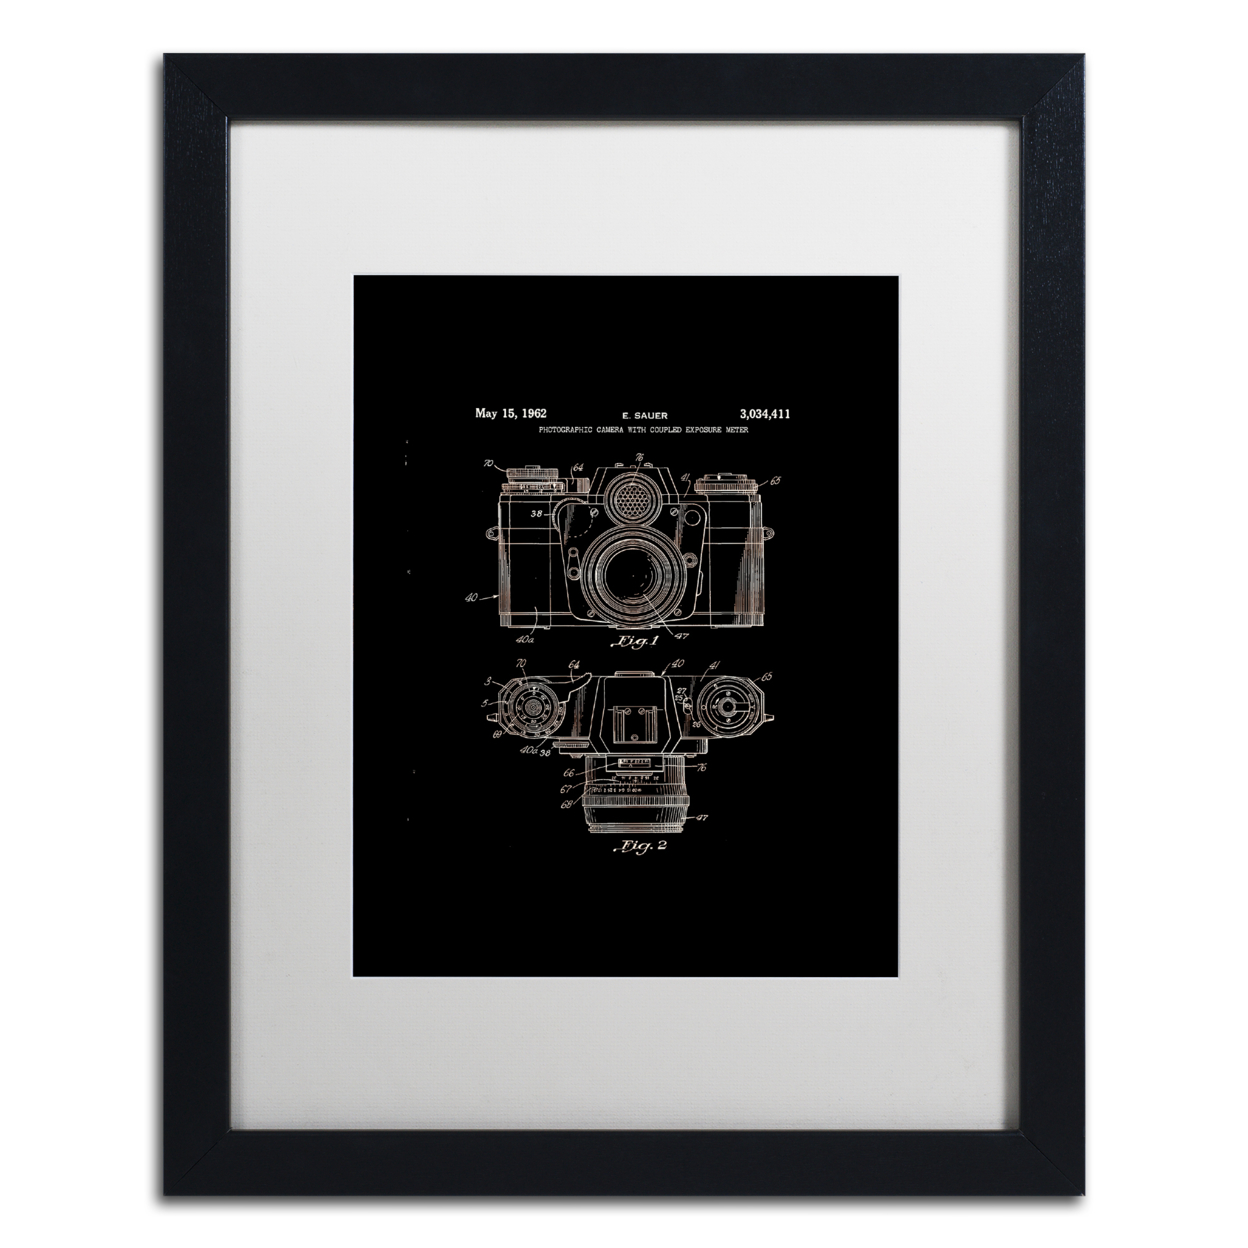 Claire Doherty 'Photographic Camera 1962 Black' Black Wooden Framed Art 18 X 22 Inches